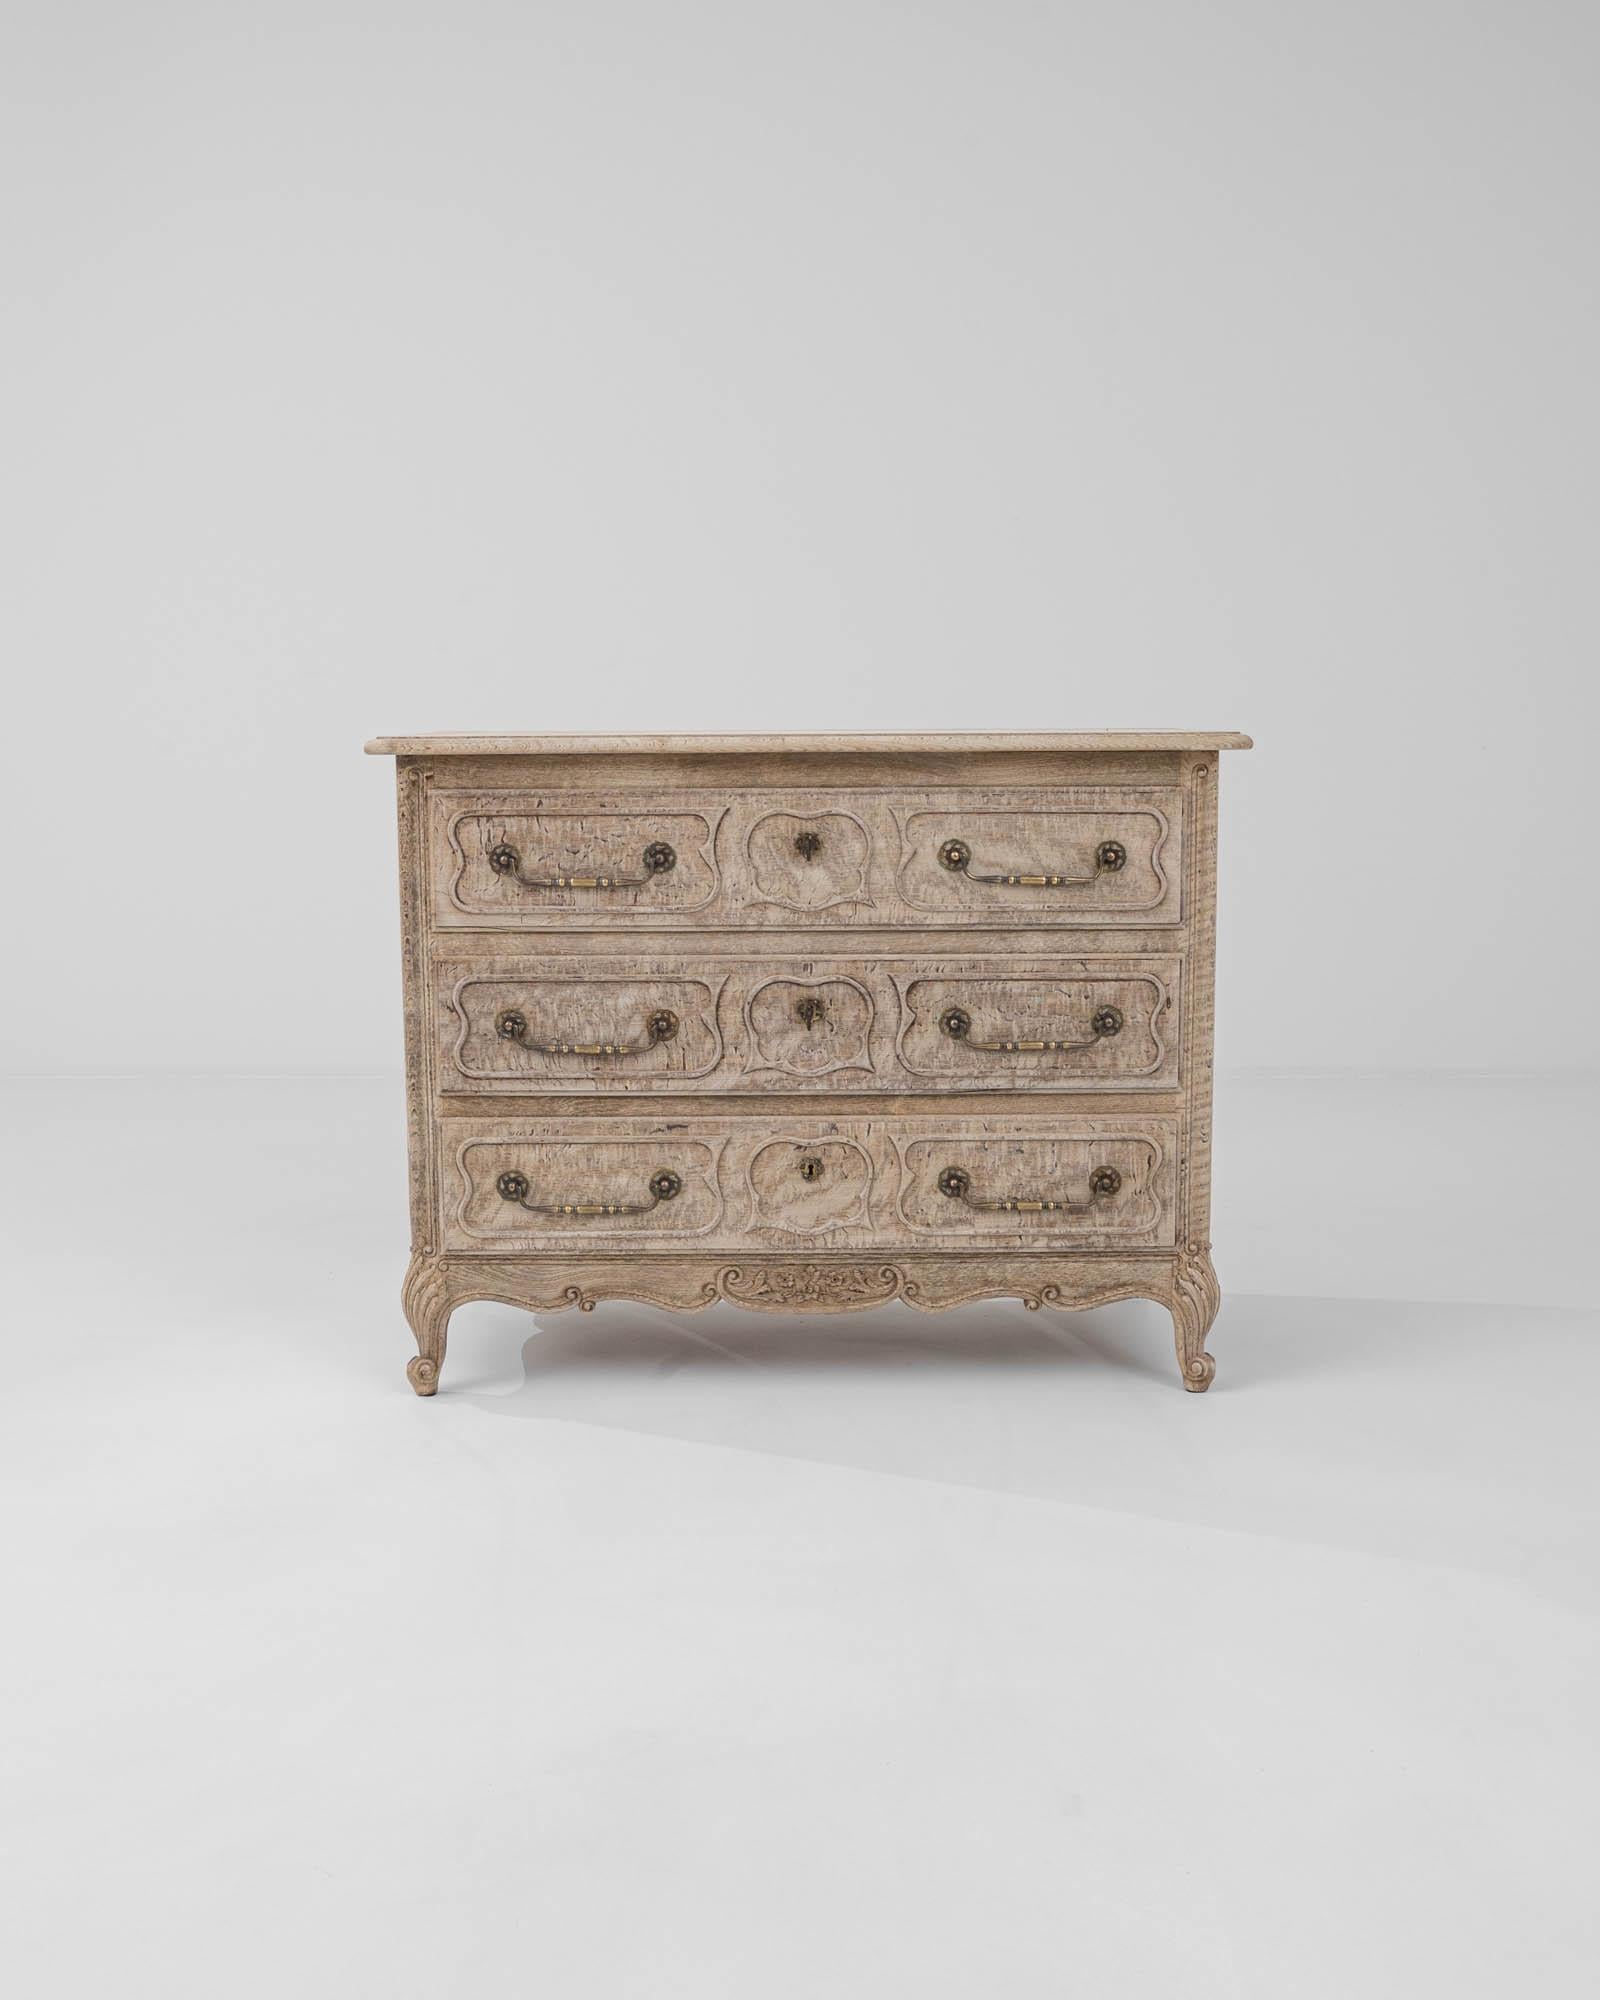 Inspired by flamboyant Baroque aesthetics, this exquisite three-drawer chest features graceful cabriole legs adorned with meticulous scroll and foliate carved accents that continue onto the scalloped apron.The dresser was handcrafted in 20th-century